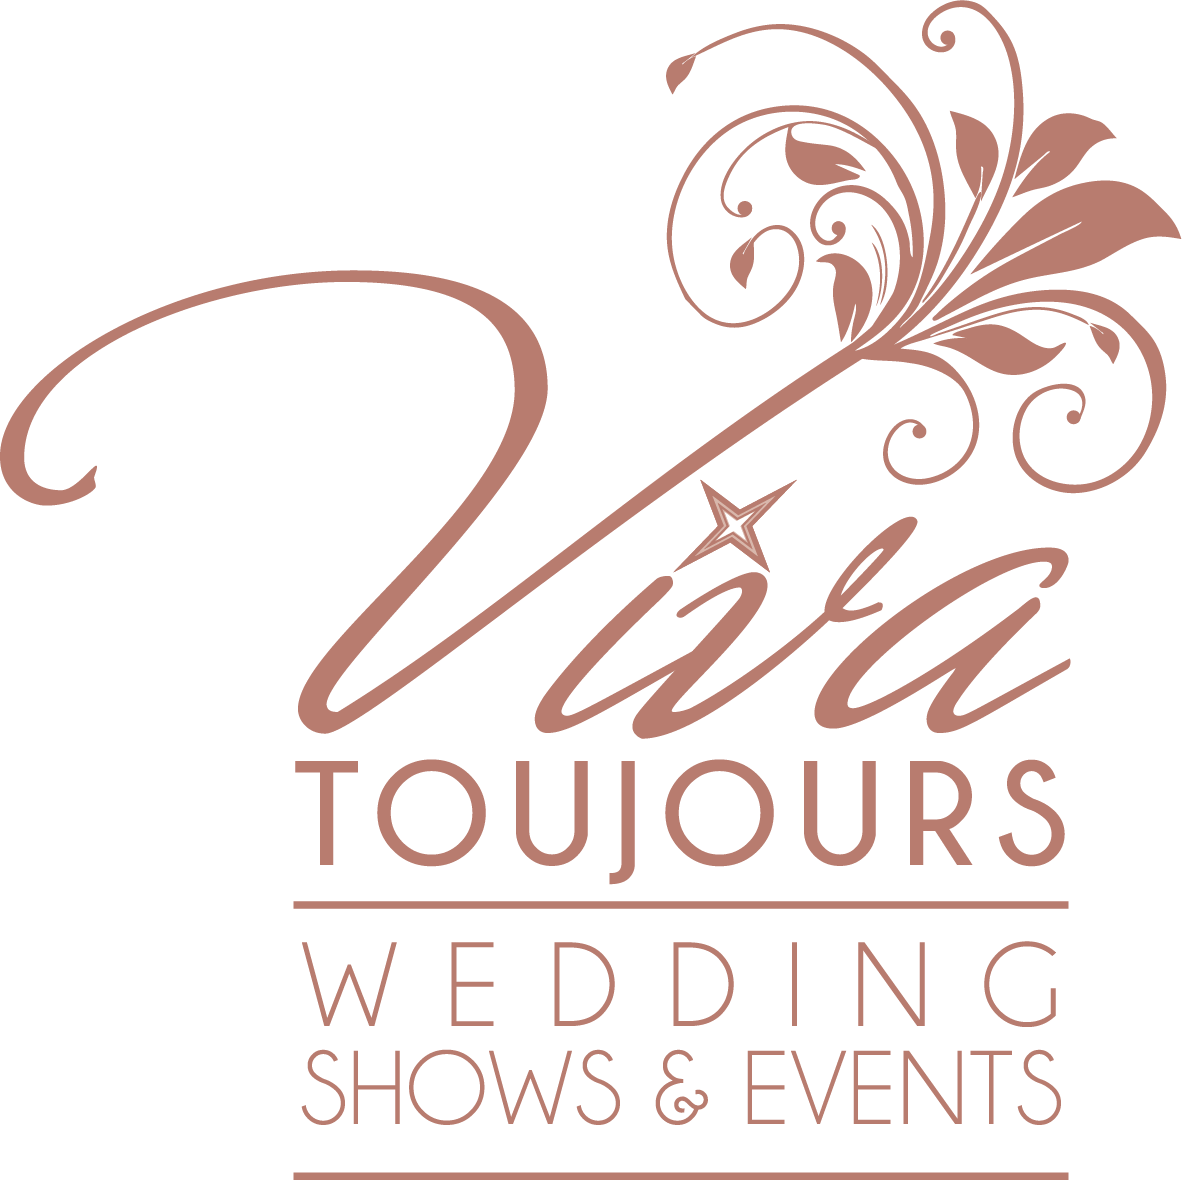 Viva Toujours Wedding Shows and Events-Image-6